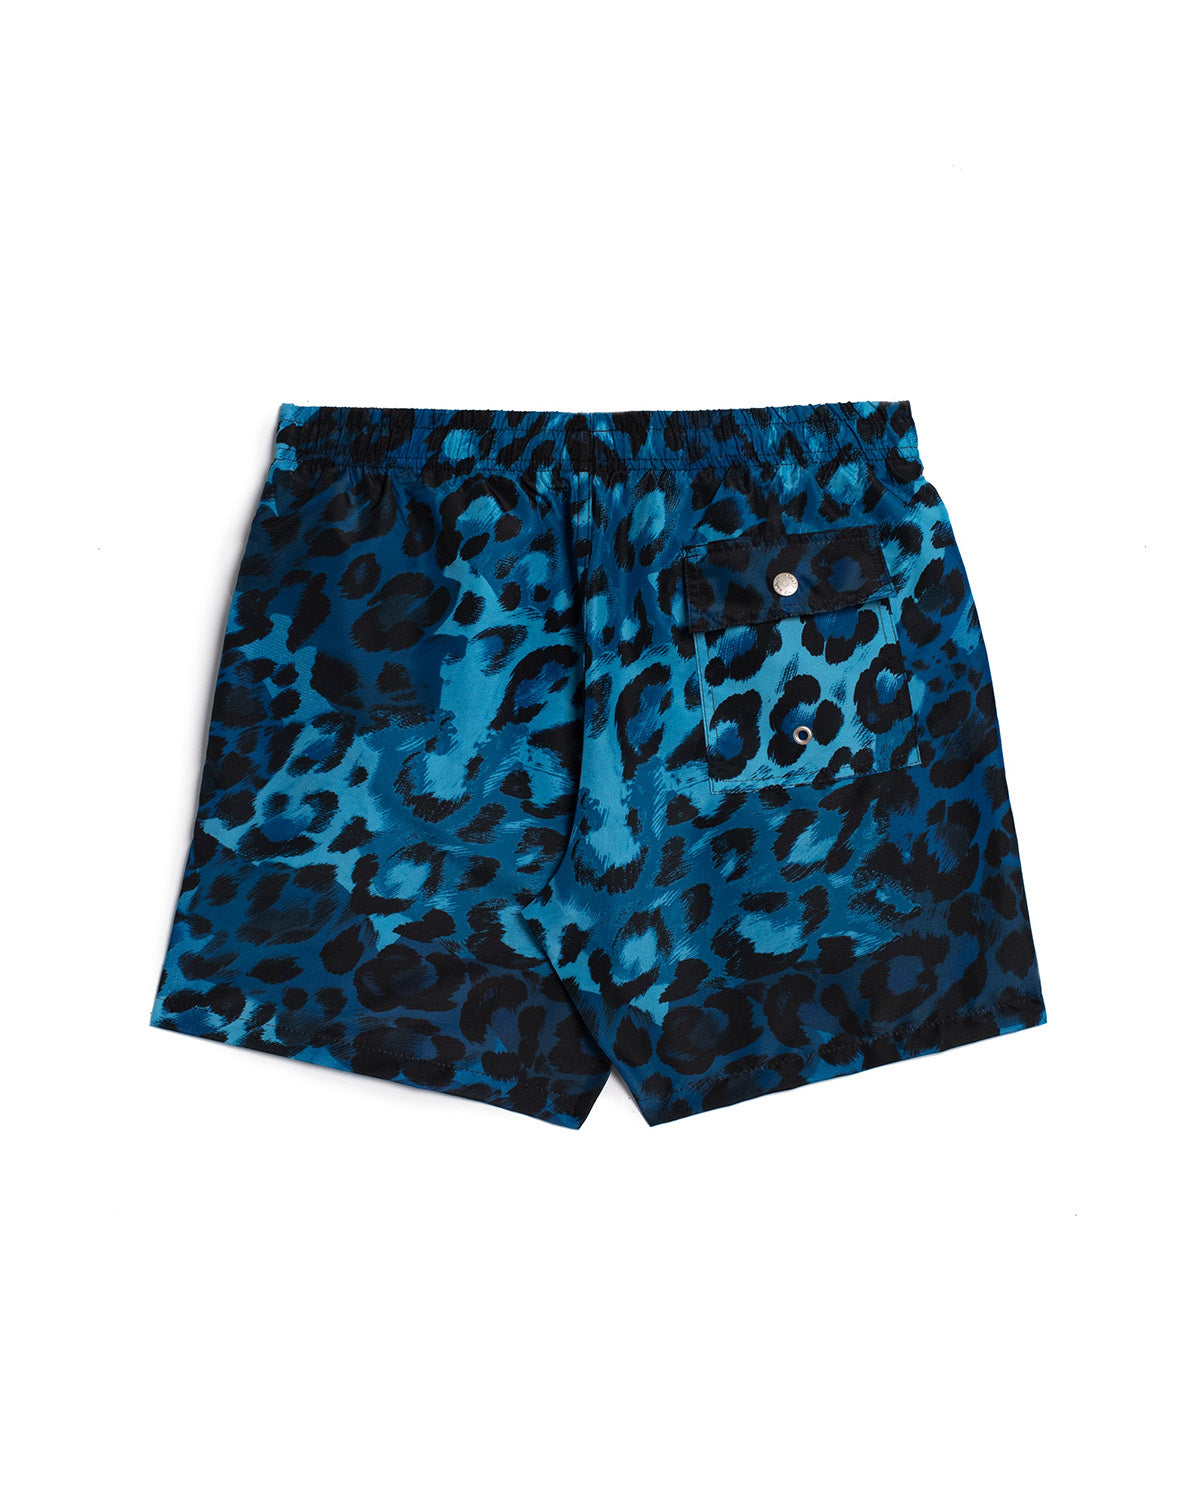 back view of blue Bather swim trunk with black leopard pattern